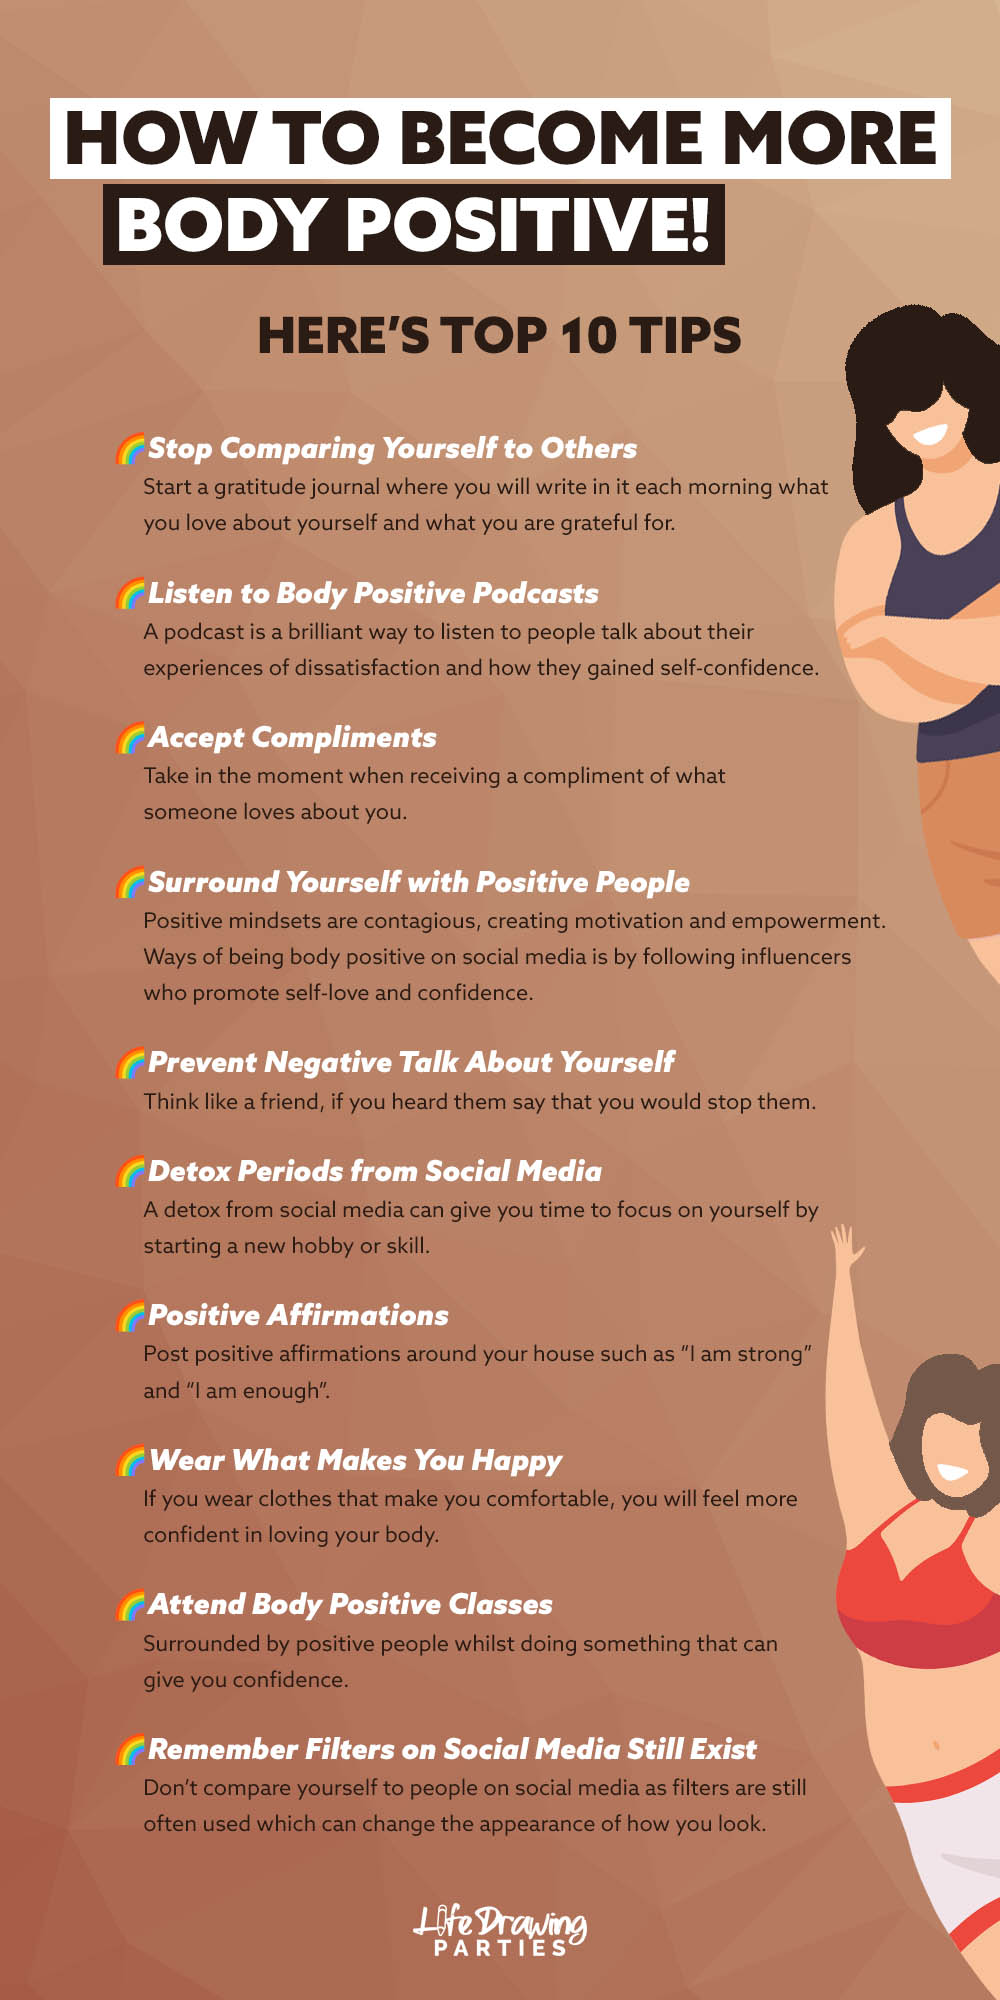 Top 10 Tips On How to Become Most Body Positive